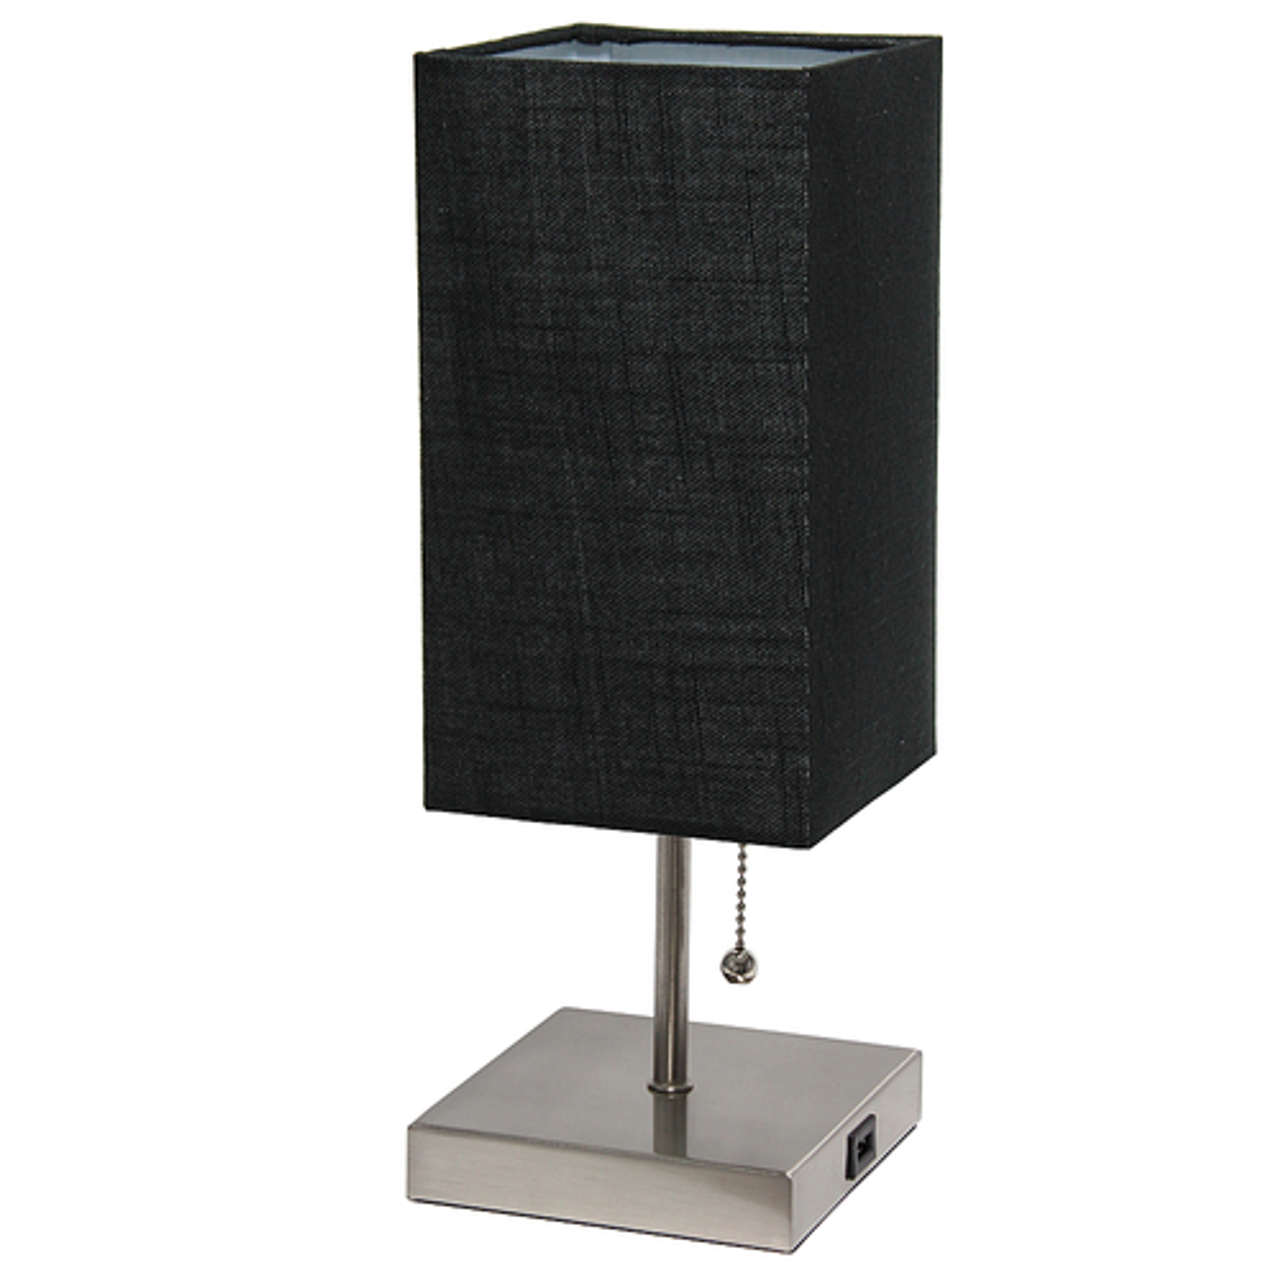 Simple Designs Petite Stick Lamp with USB Charging Port and Fabric Shade, Black - Brushed Nickel base/Black shade